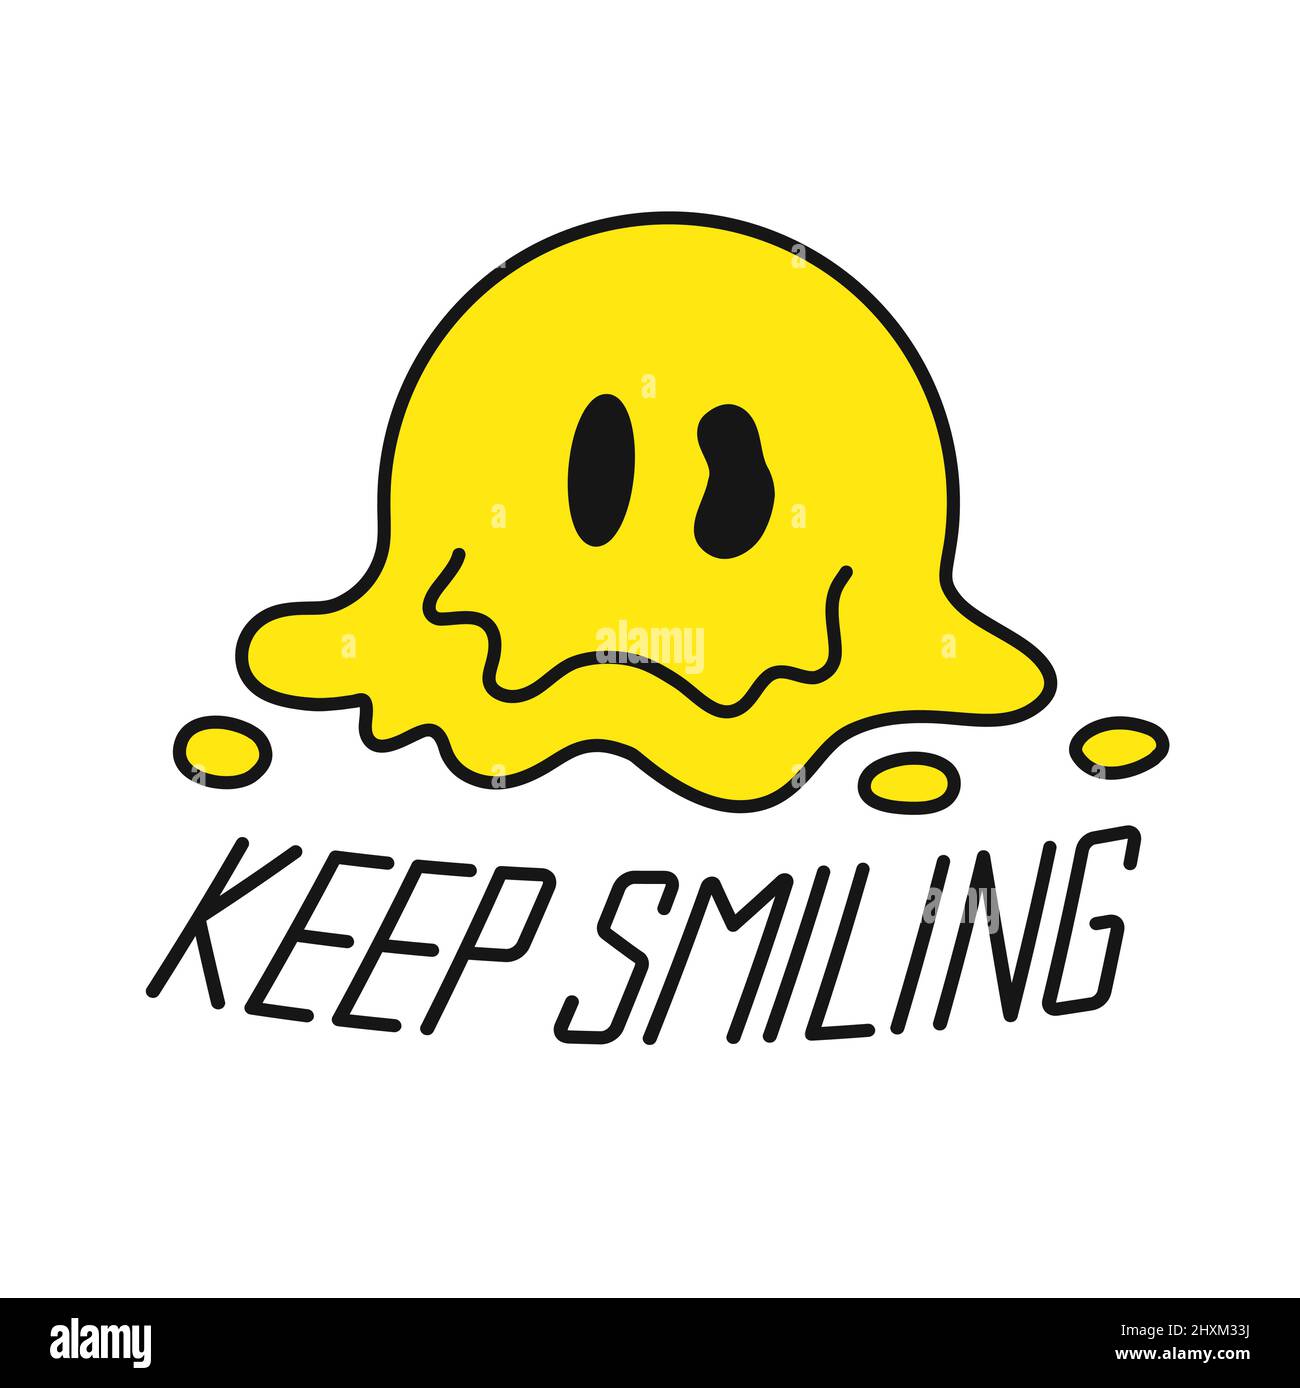 Melt smile face t-shirt print. Keep smiling quote text. Vector ...